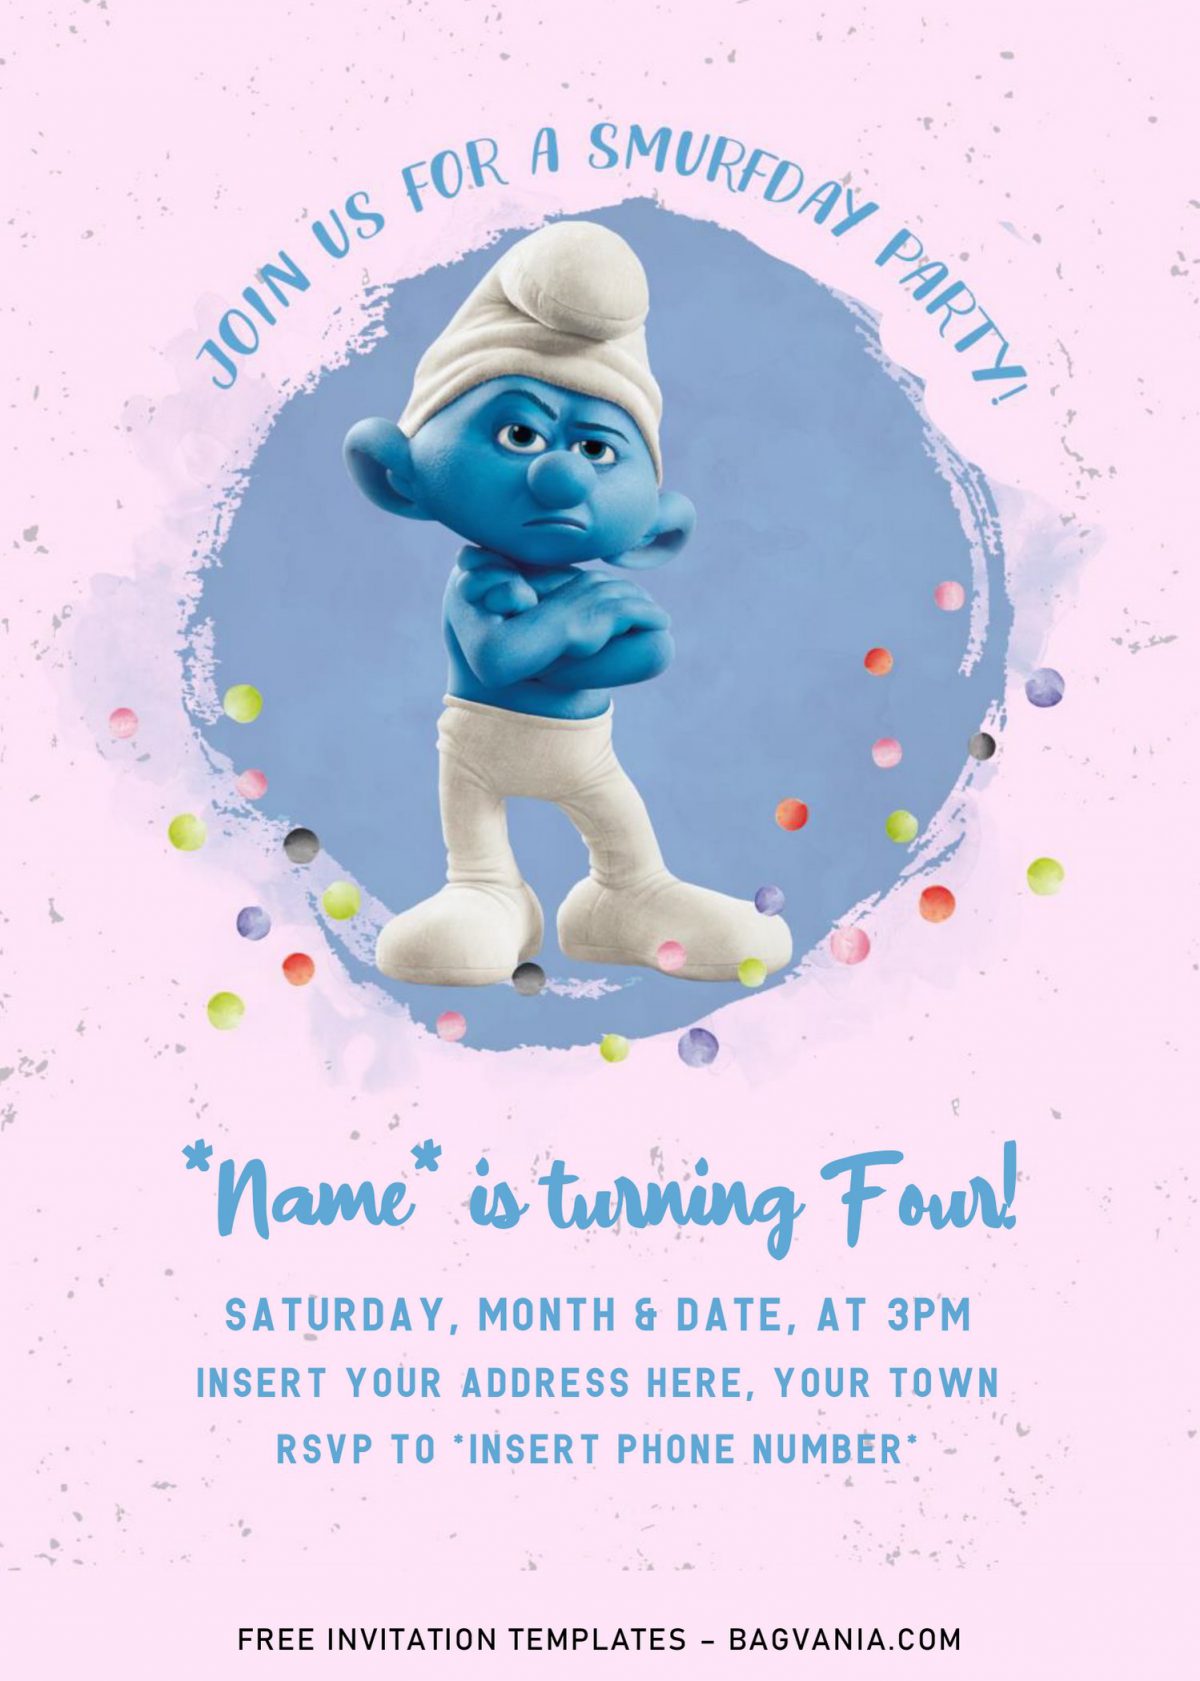 Free Smurf Birthday Invitation Templates For Free and has blue background